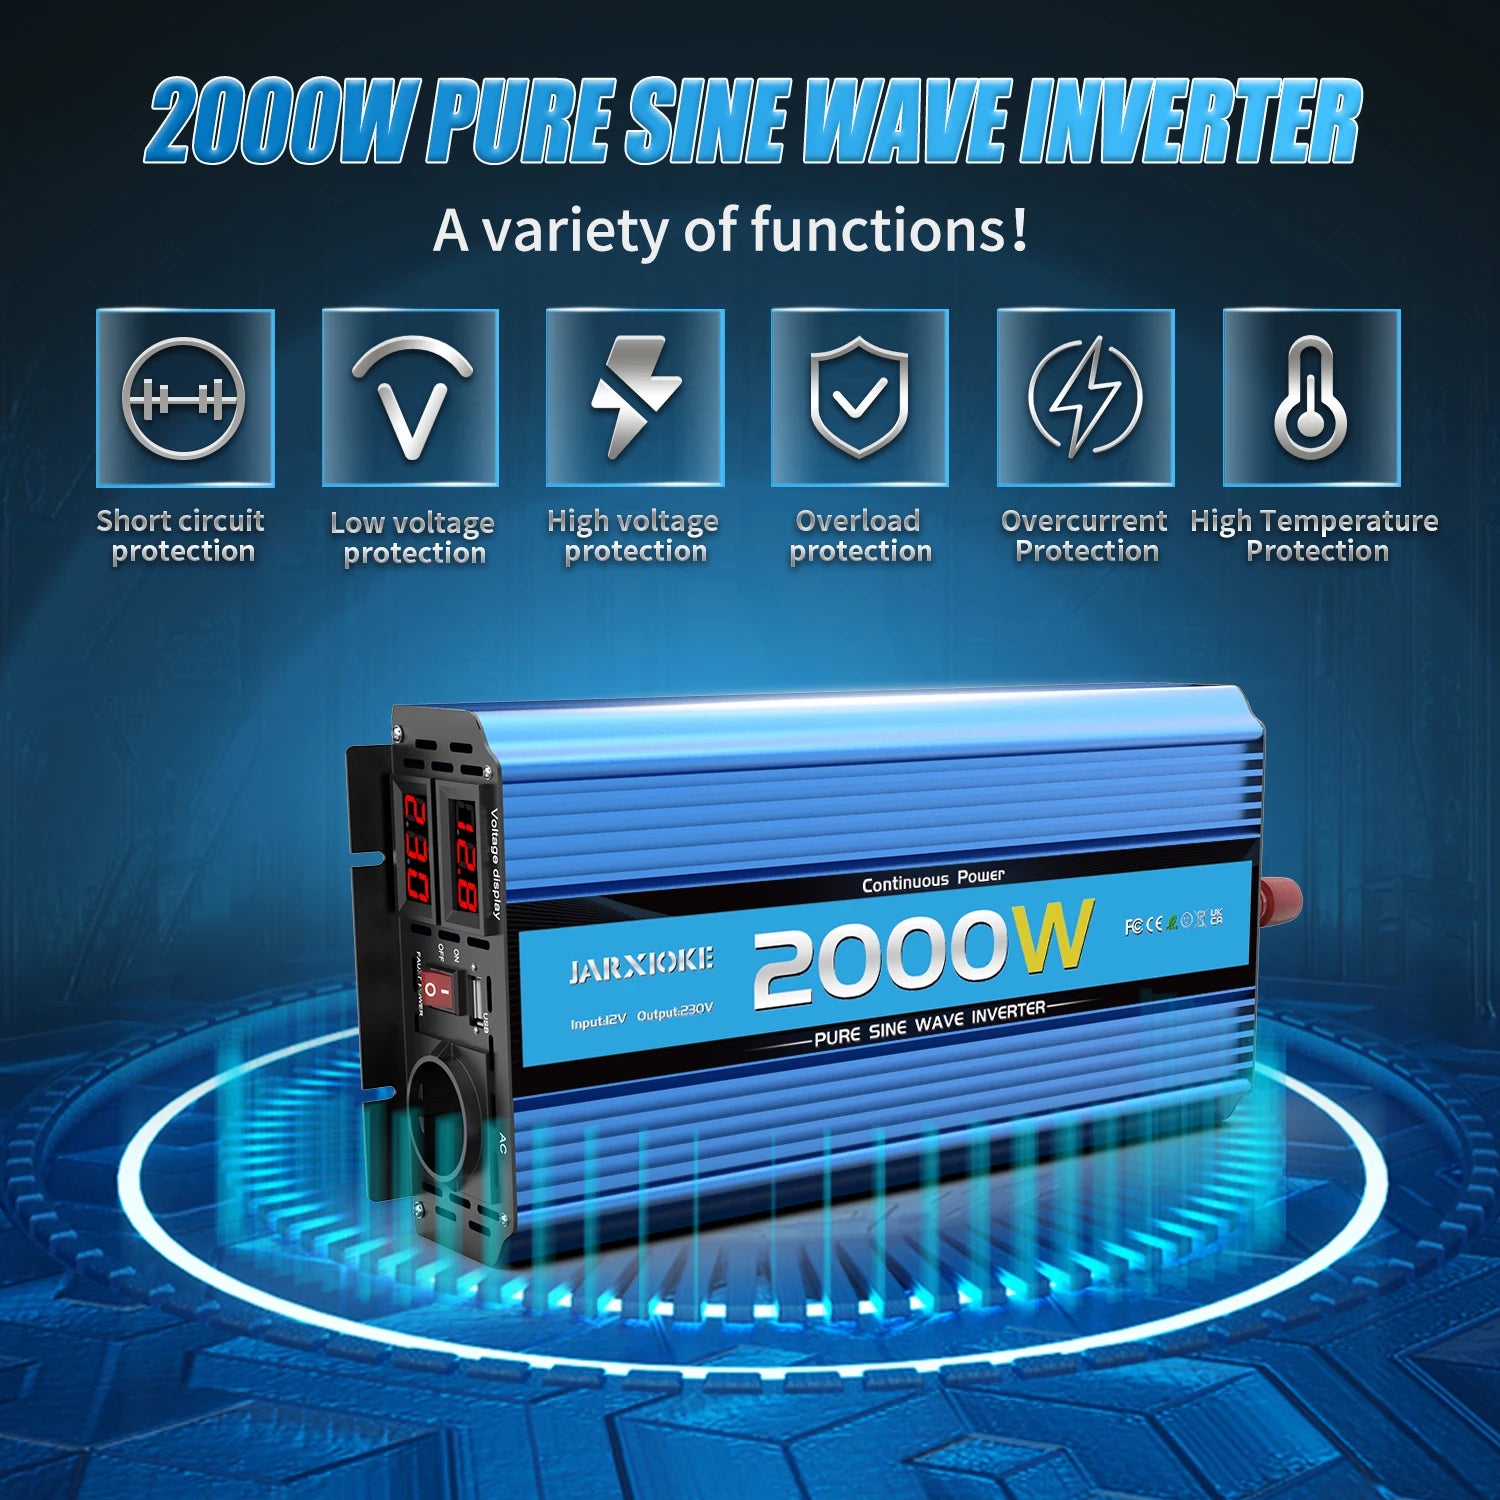 Pure Sine Wave Inverter with multiple protections and power output up to 4000W.